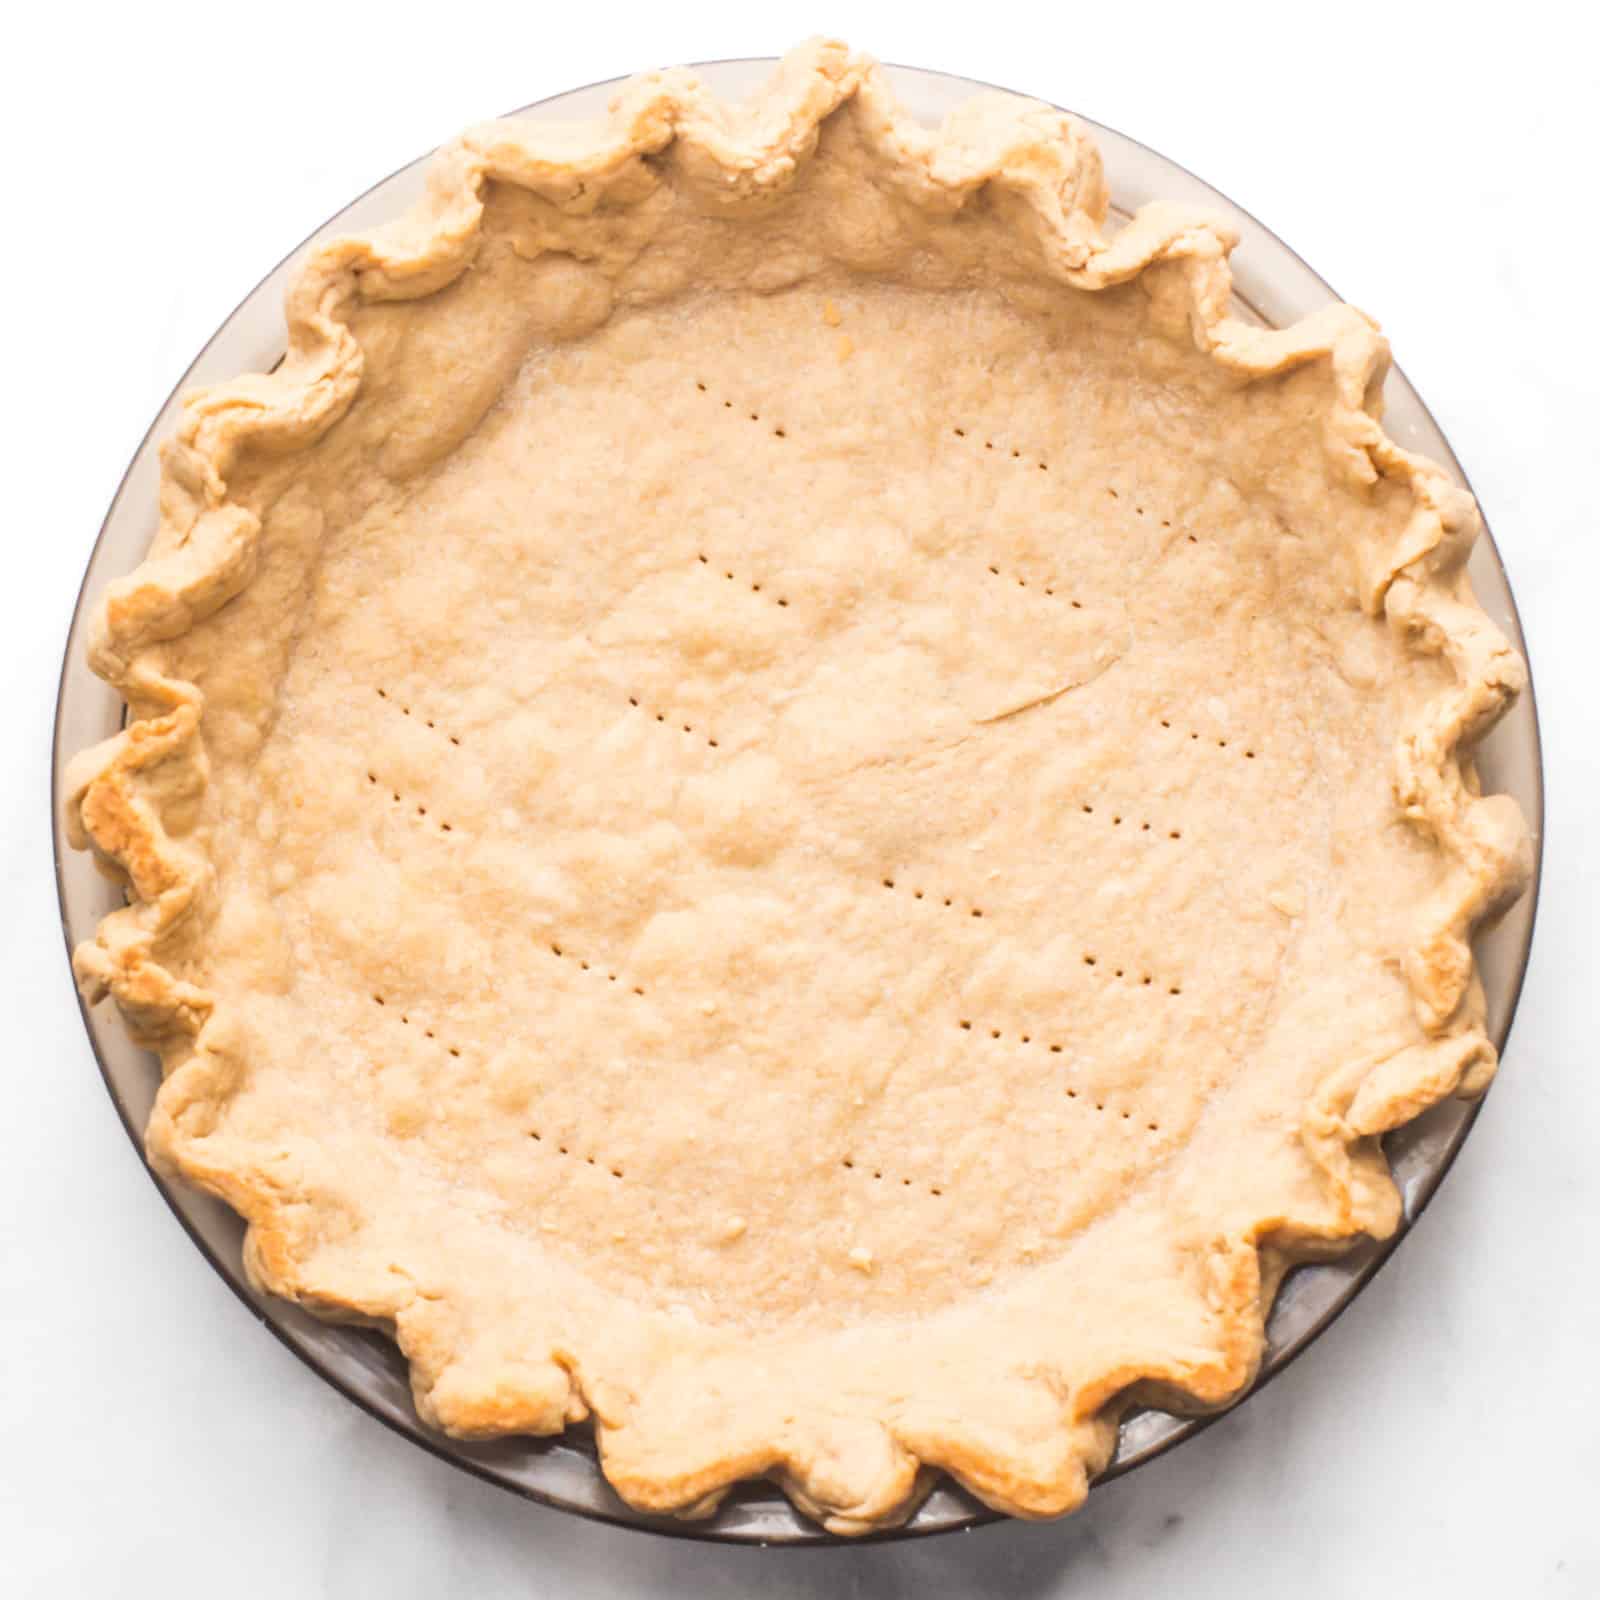 A pie crust fresh from the oven with the fluted edges nicely golden.